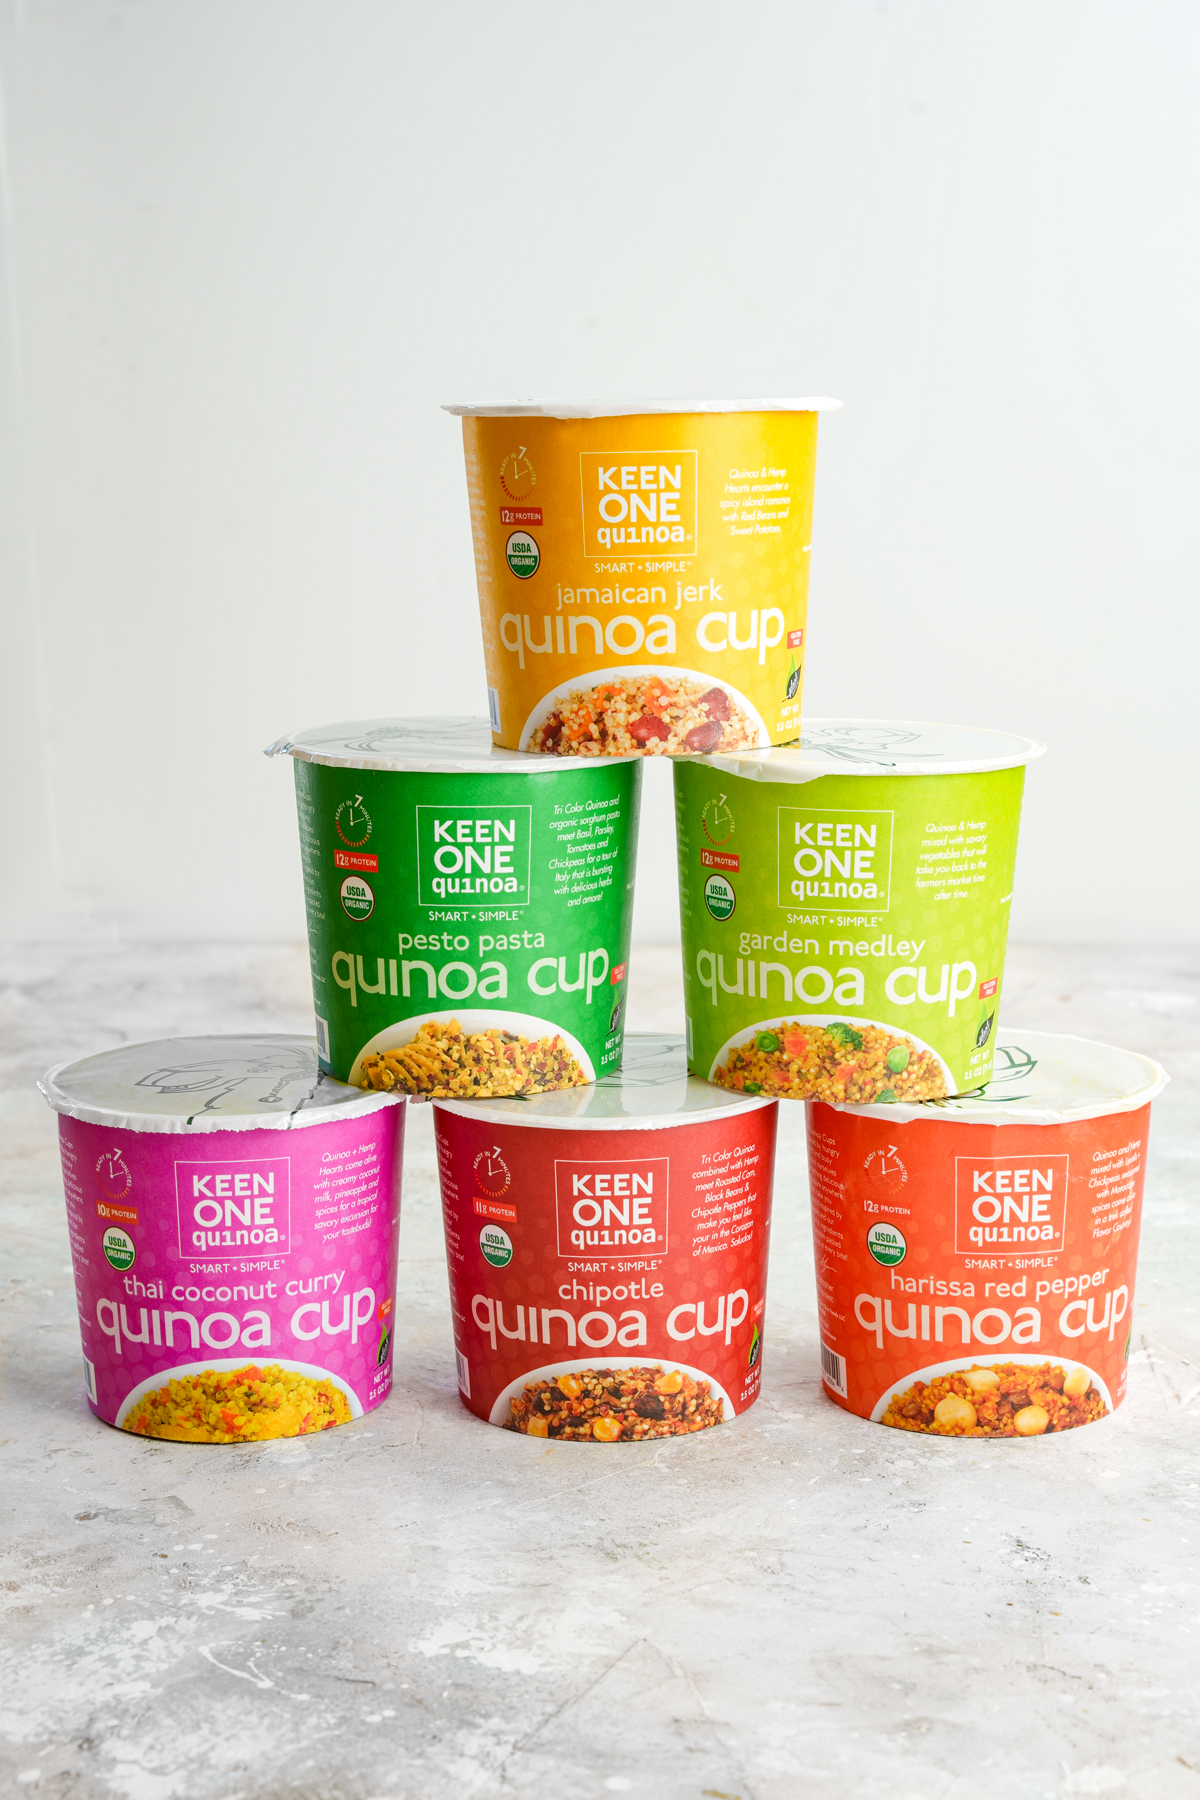 keen one cups stacked on top showing the individual flavors: jamaican jerk, pesto pasta, garden medley, thai coconut curry, chipotle, harissa red pepper.